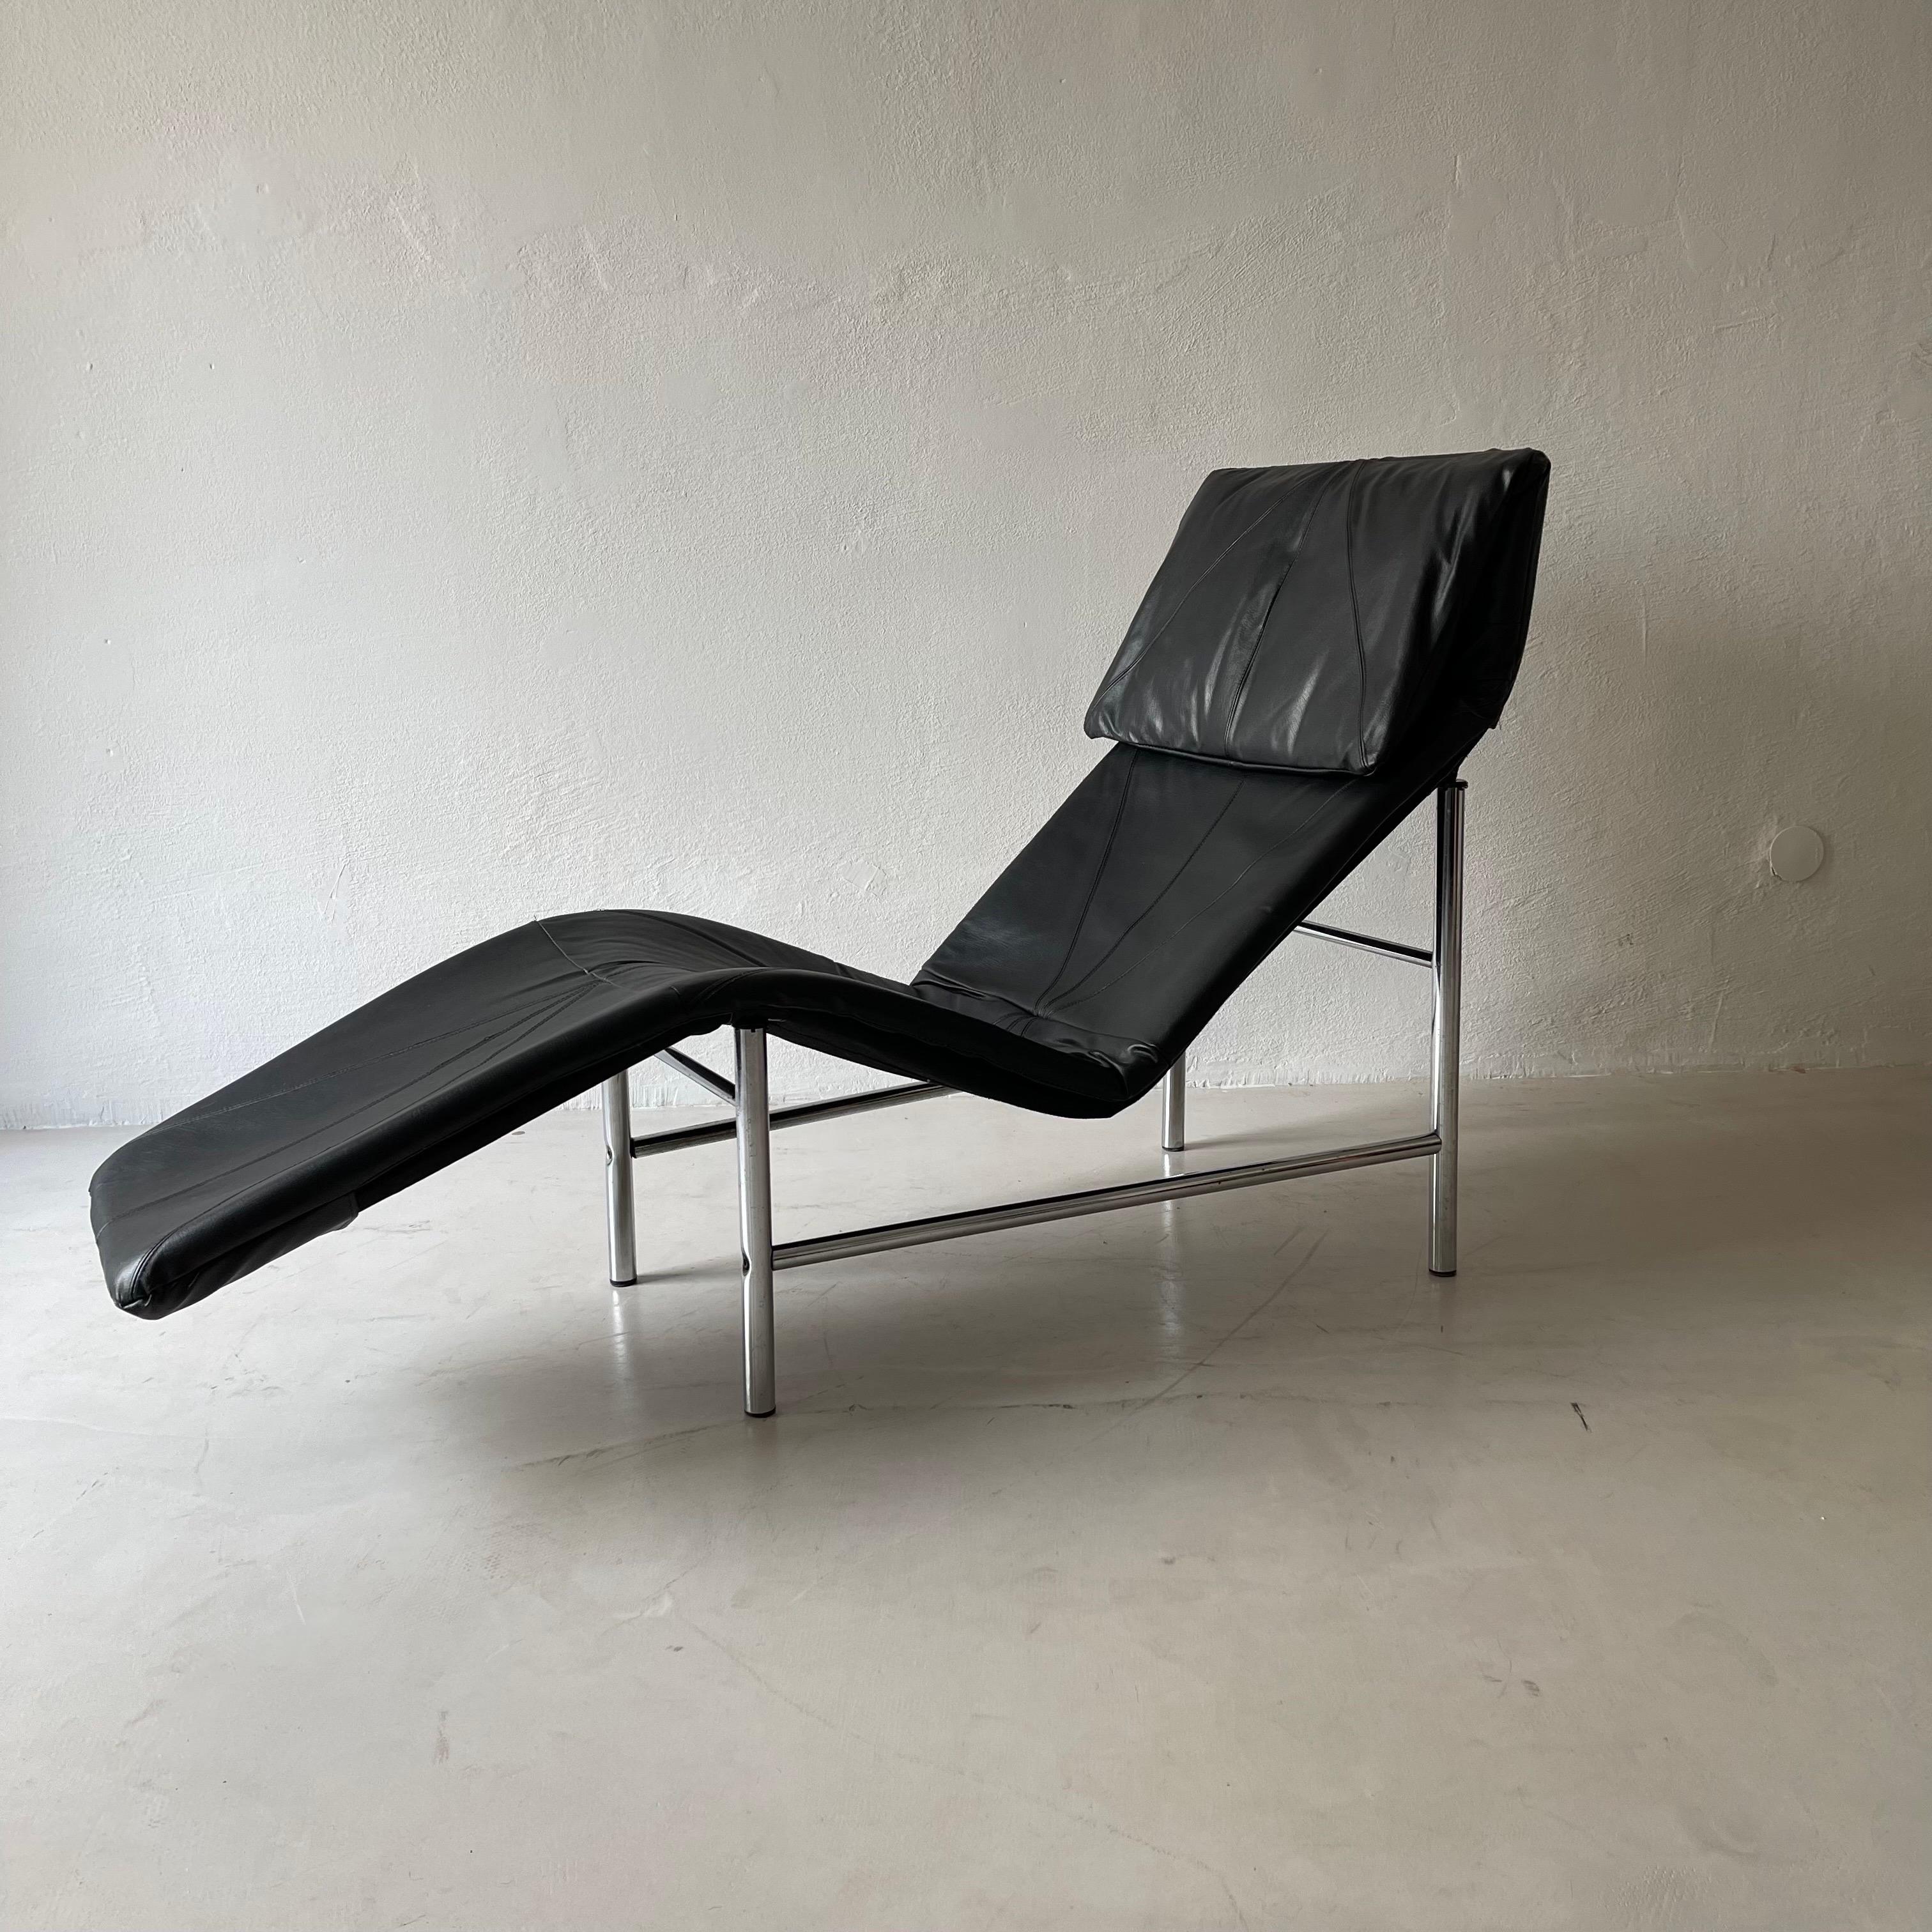 Vintage Faux Leather Chaise Longues by Tord Bjorklund Sweden, 1970 For Sale 2